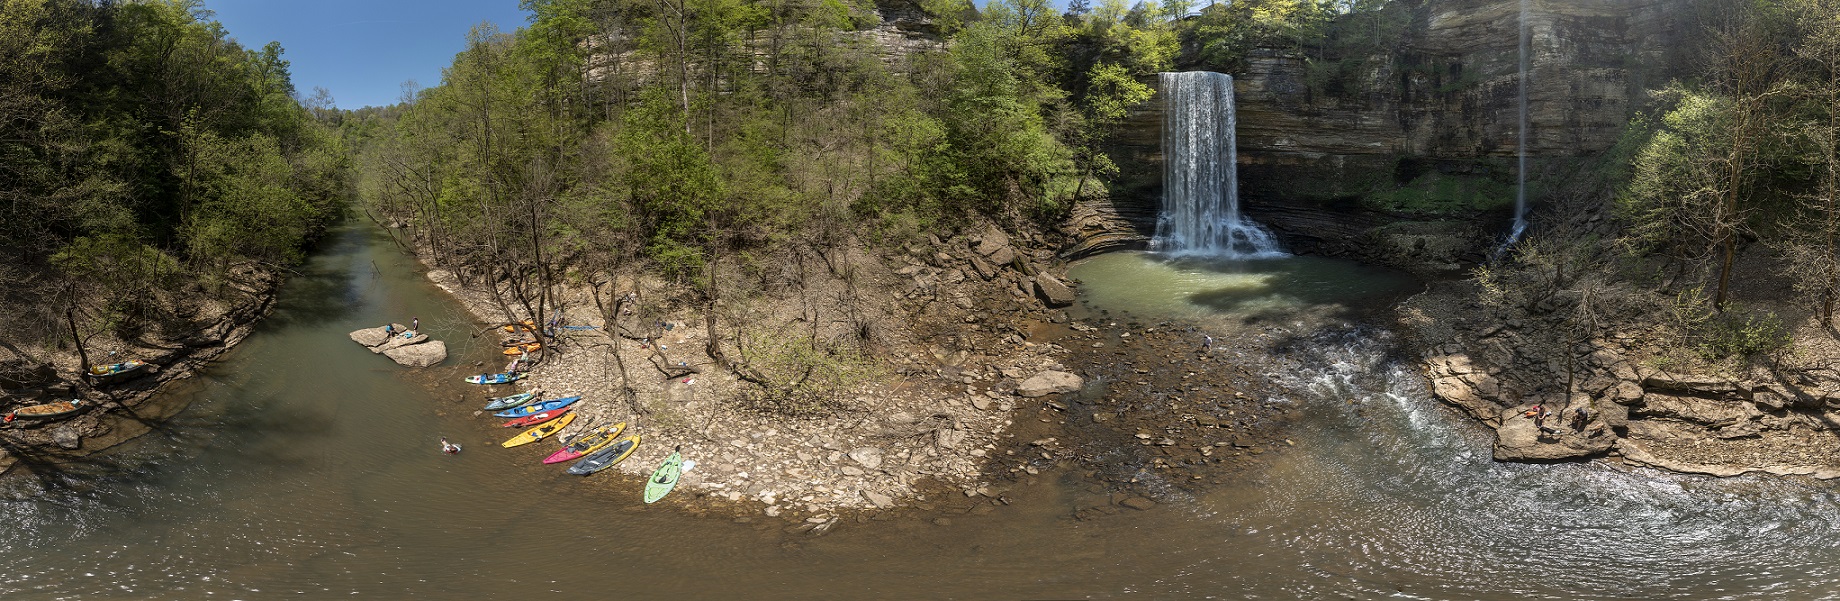 Panoramic photo of waterfalls on the right side with colorful kayaks beached on a rocky shore on the left side.